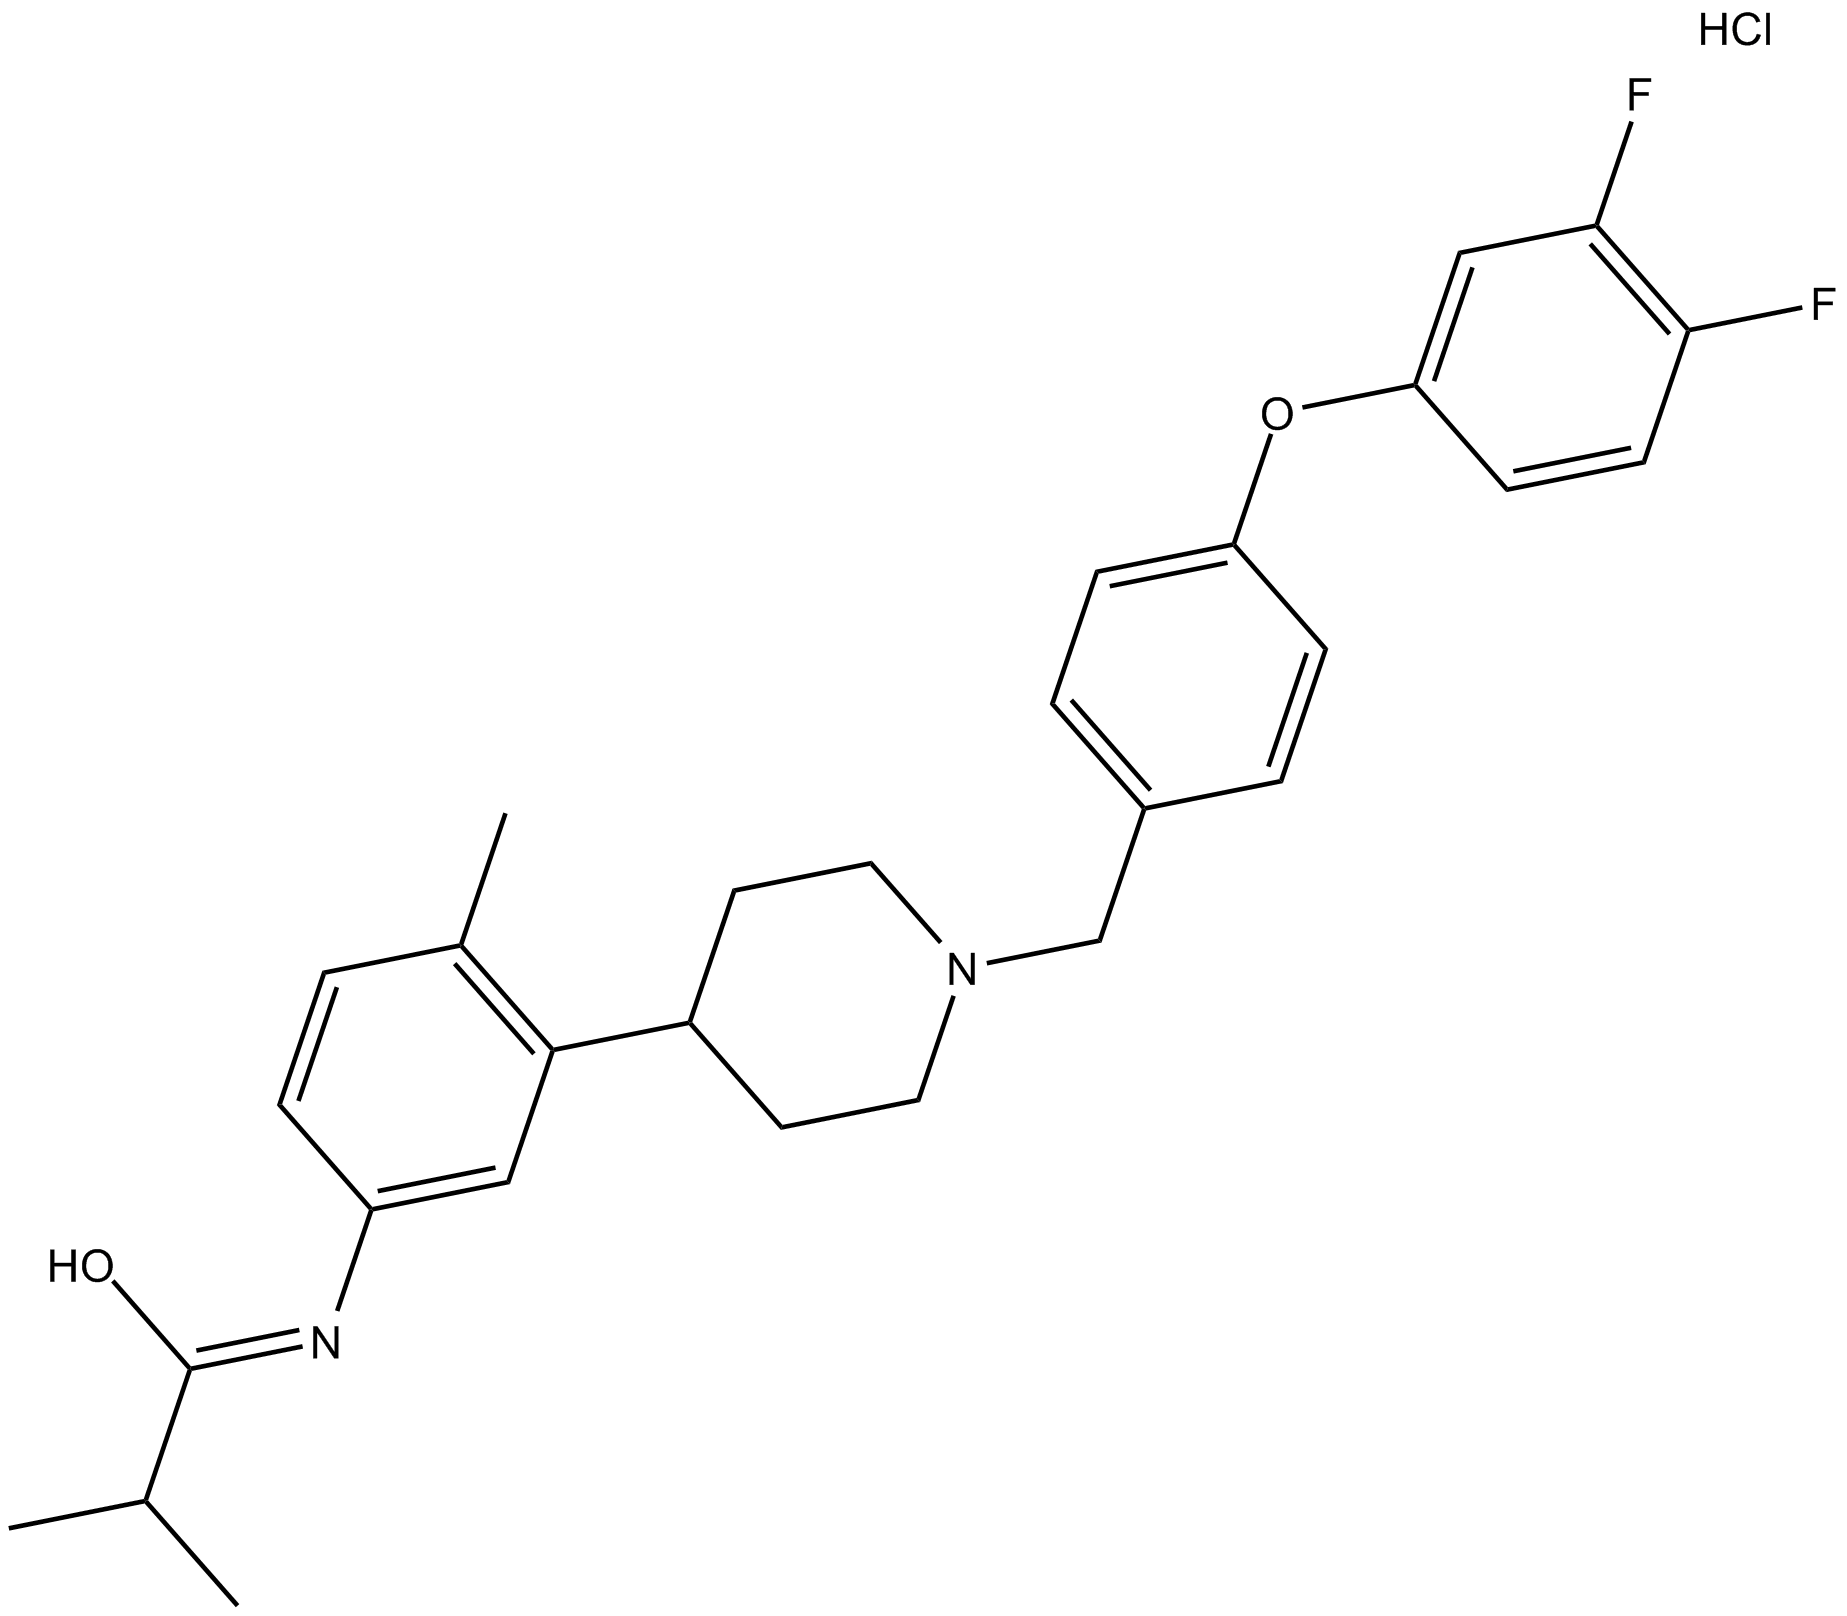 SNAP 94847 hydrochloride  Chemical Structure